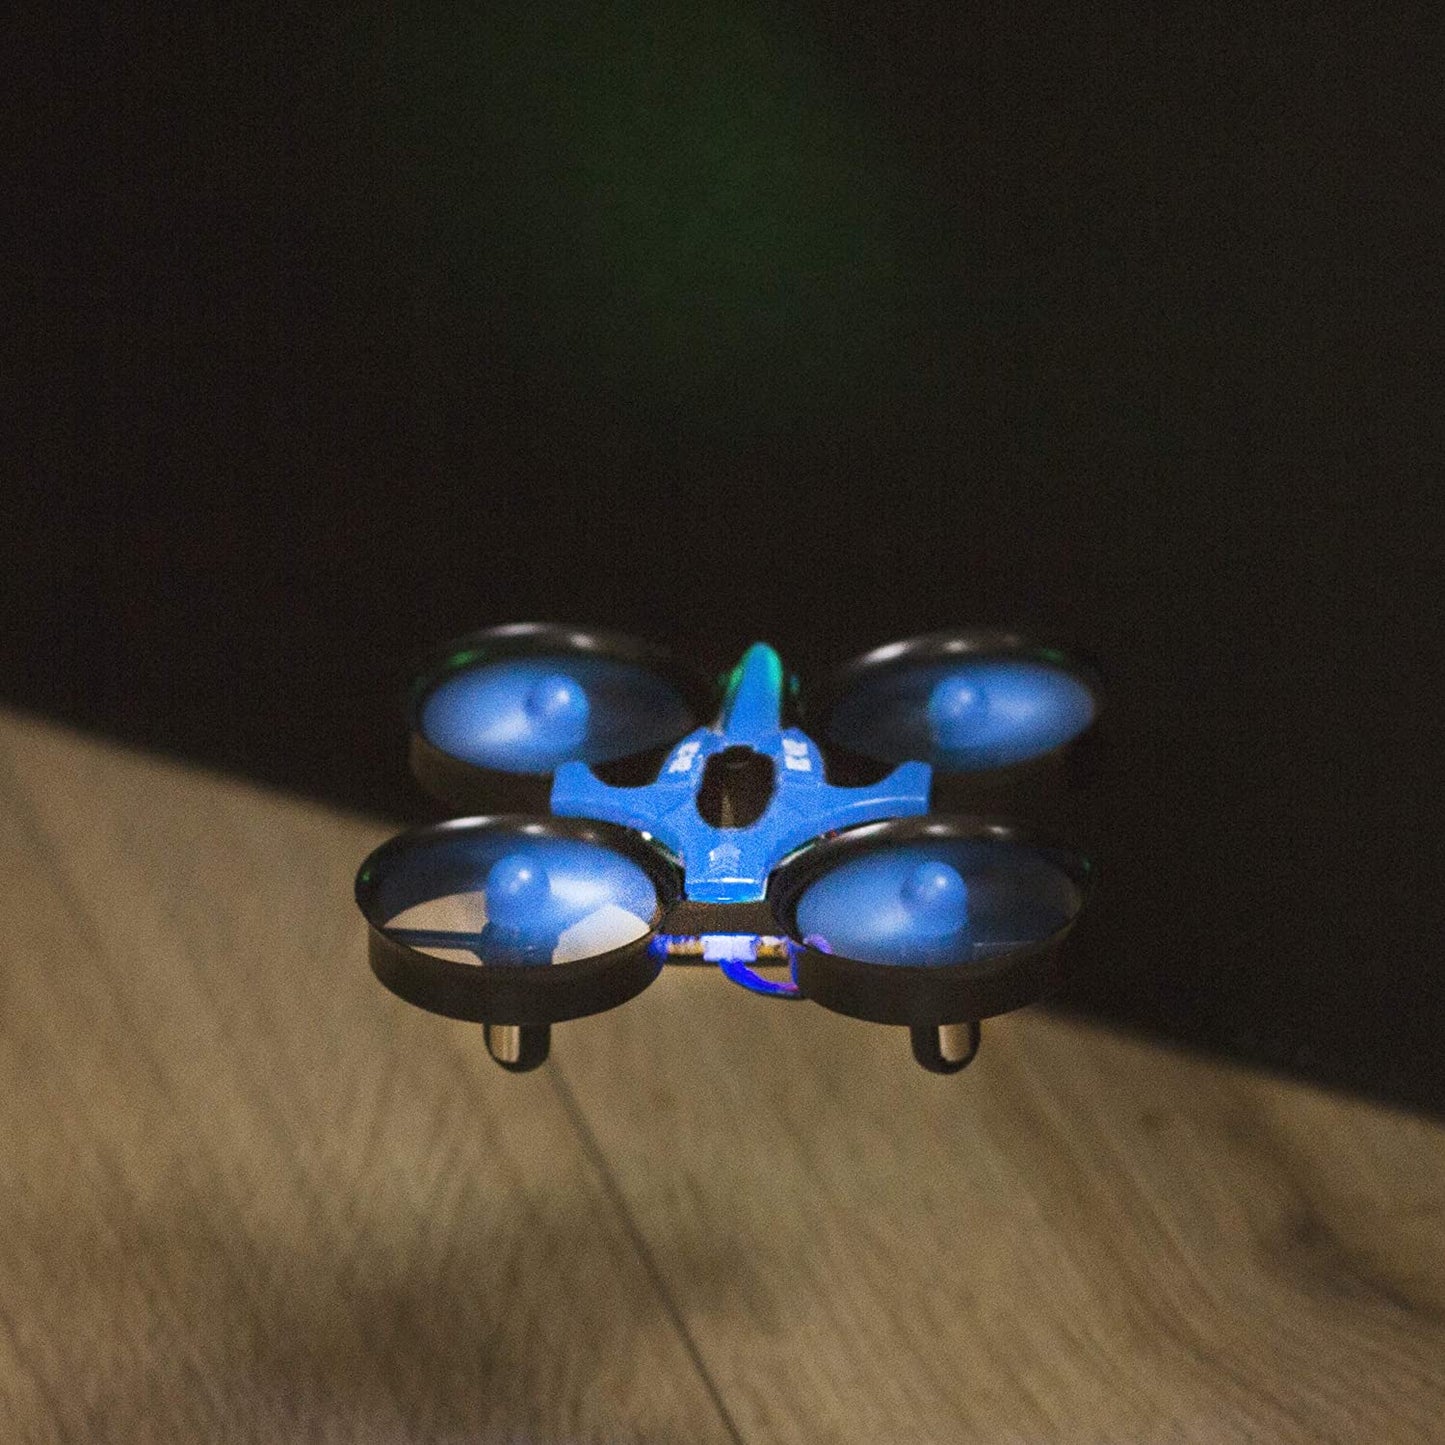 Remote Control Mini Quadcopter | TechTonic® - Stringspeed